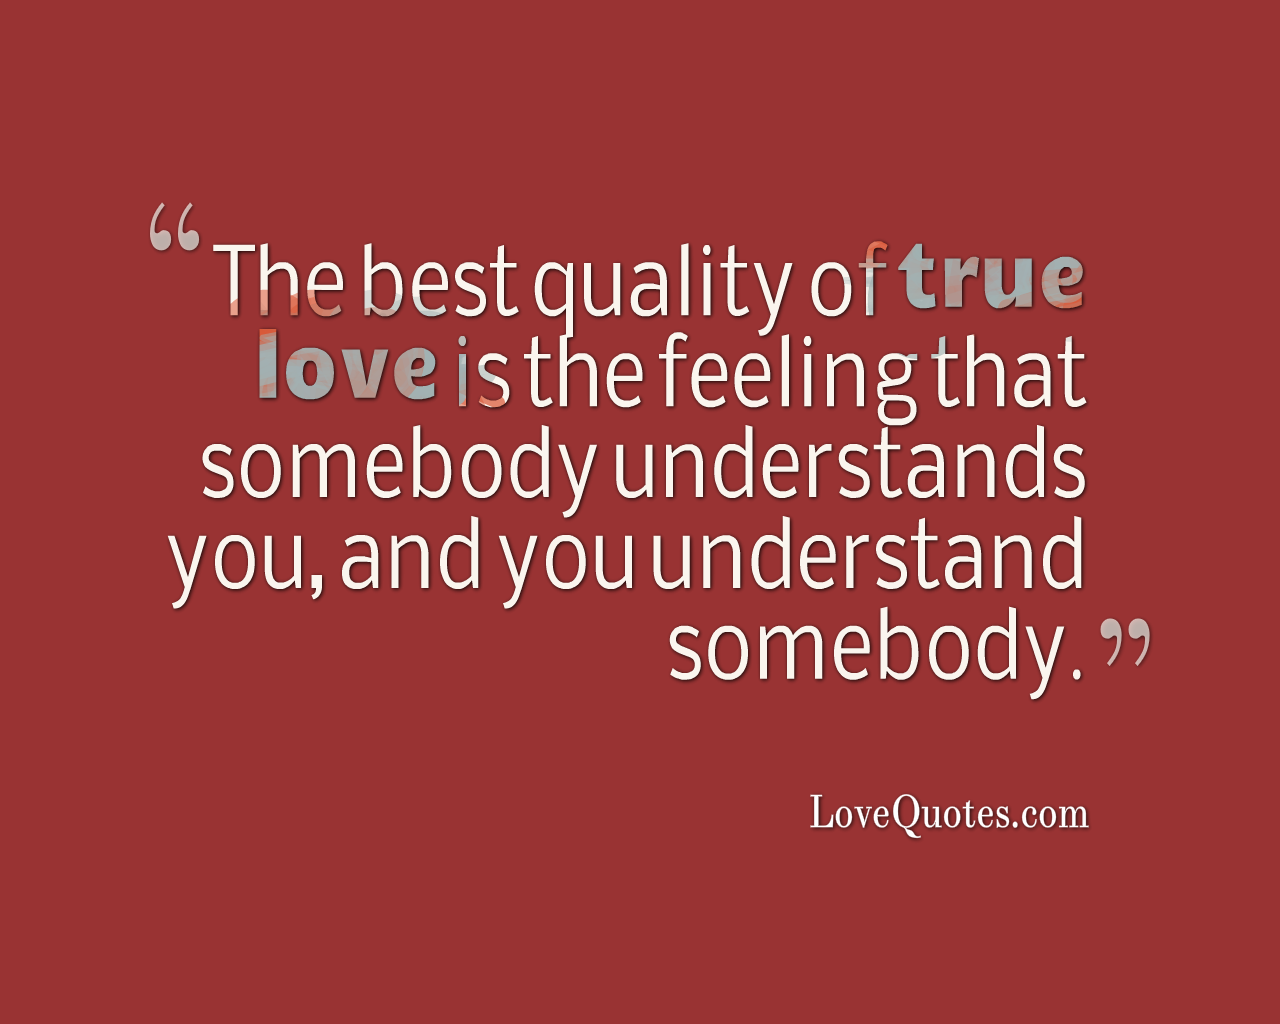 The Quality Of True Love